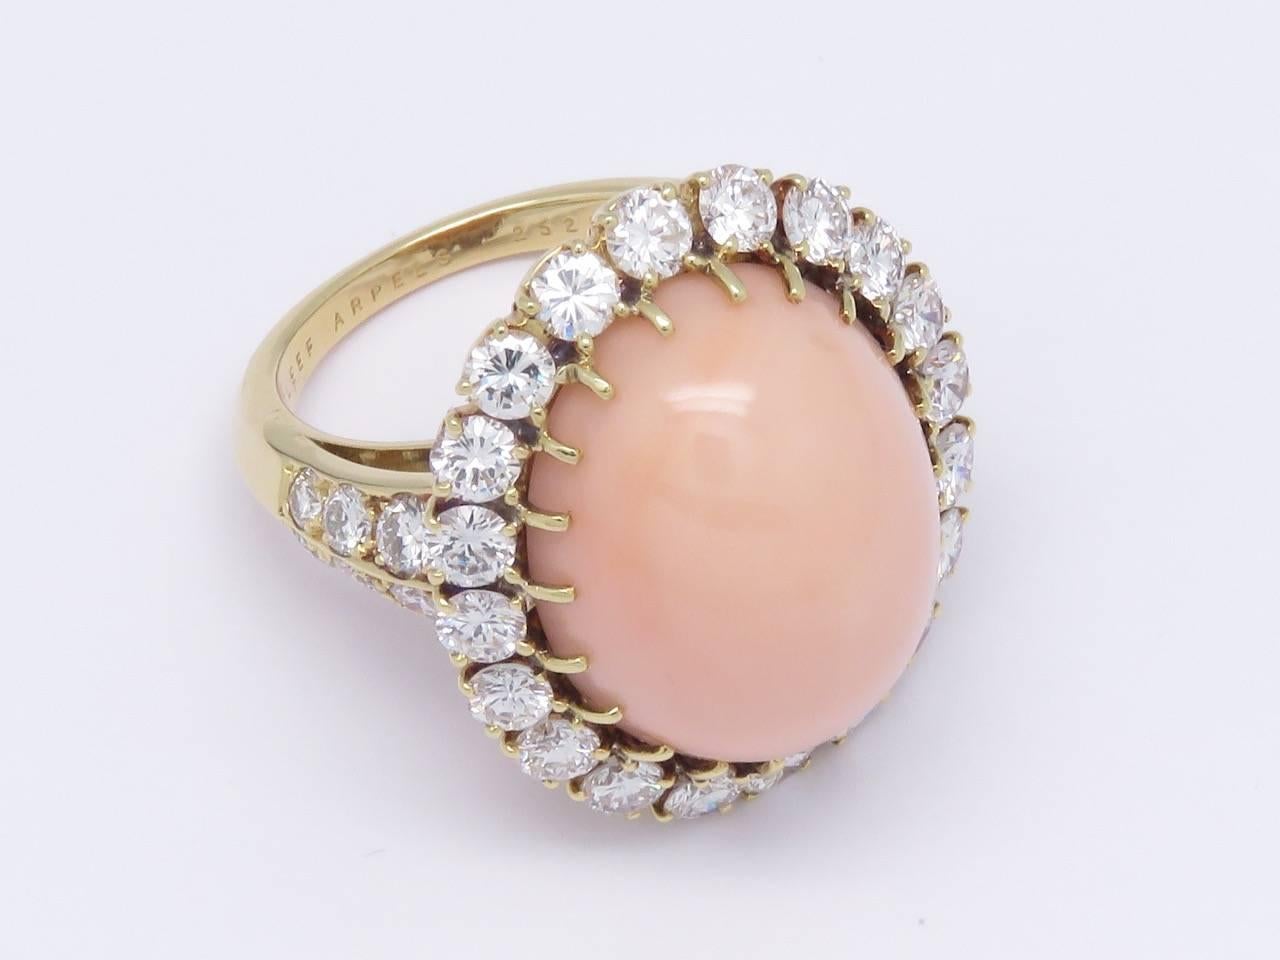 Set with a cabochon Coral Pink within a round brilliant diamond surround flanked to either side by six round brilliant diamonds.
Mounted in 18k yellow gold.
French assay marks for gold.
Circa 1970

Measurements:
Coral Cabochon: Approximately 0.83 in